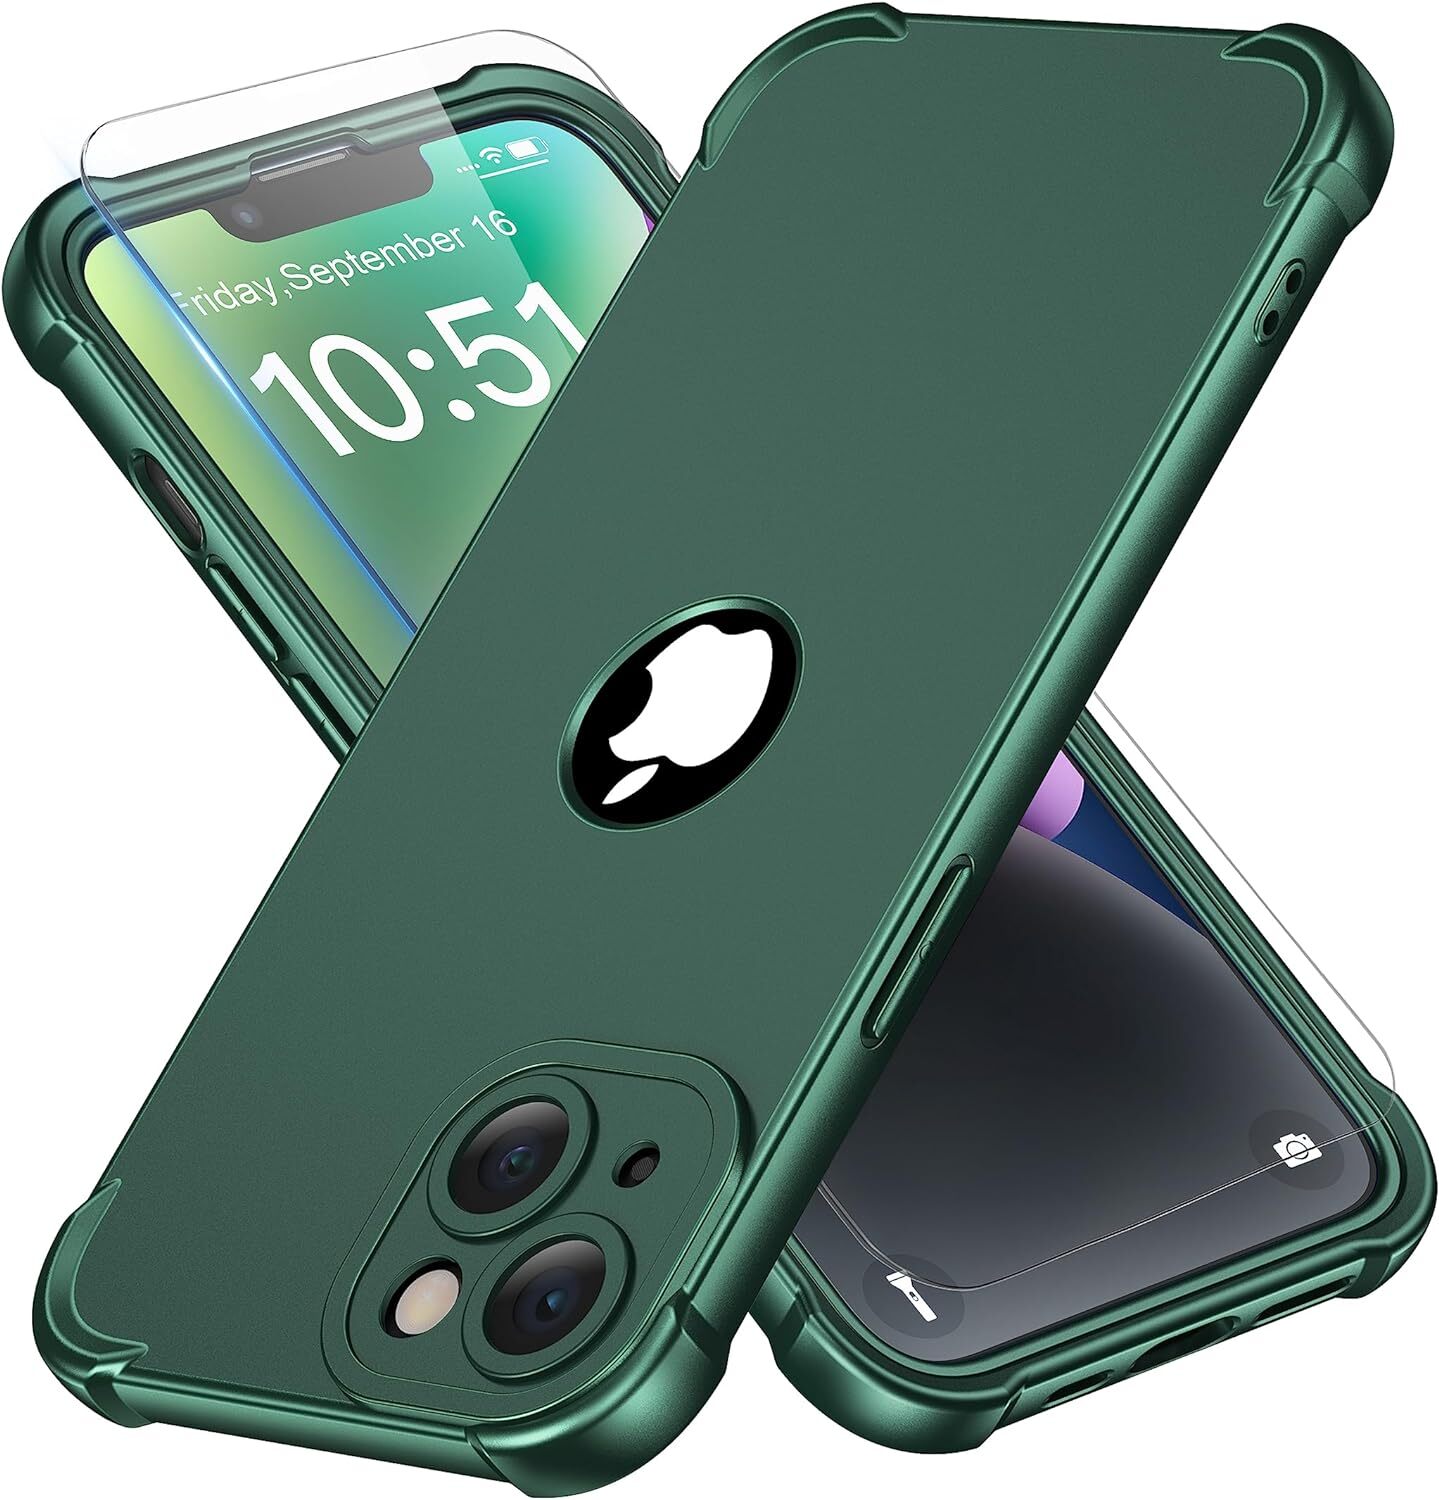 A green phone case and clear screen protector installed on an iPhone